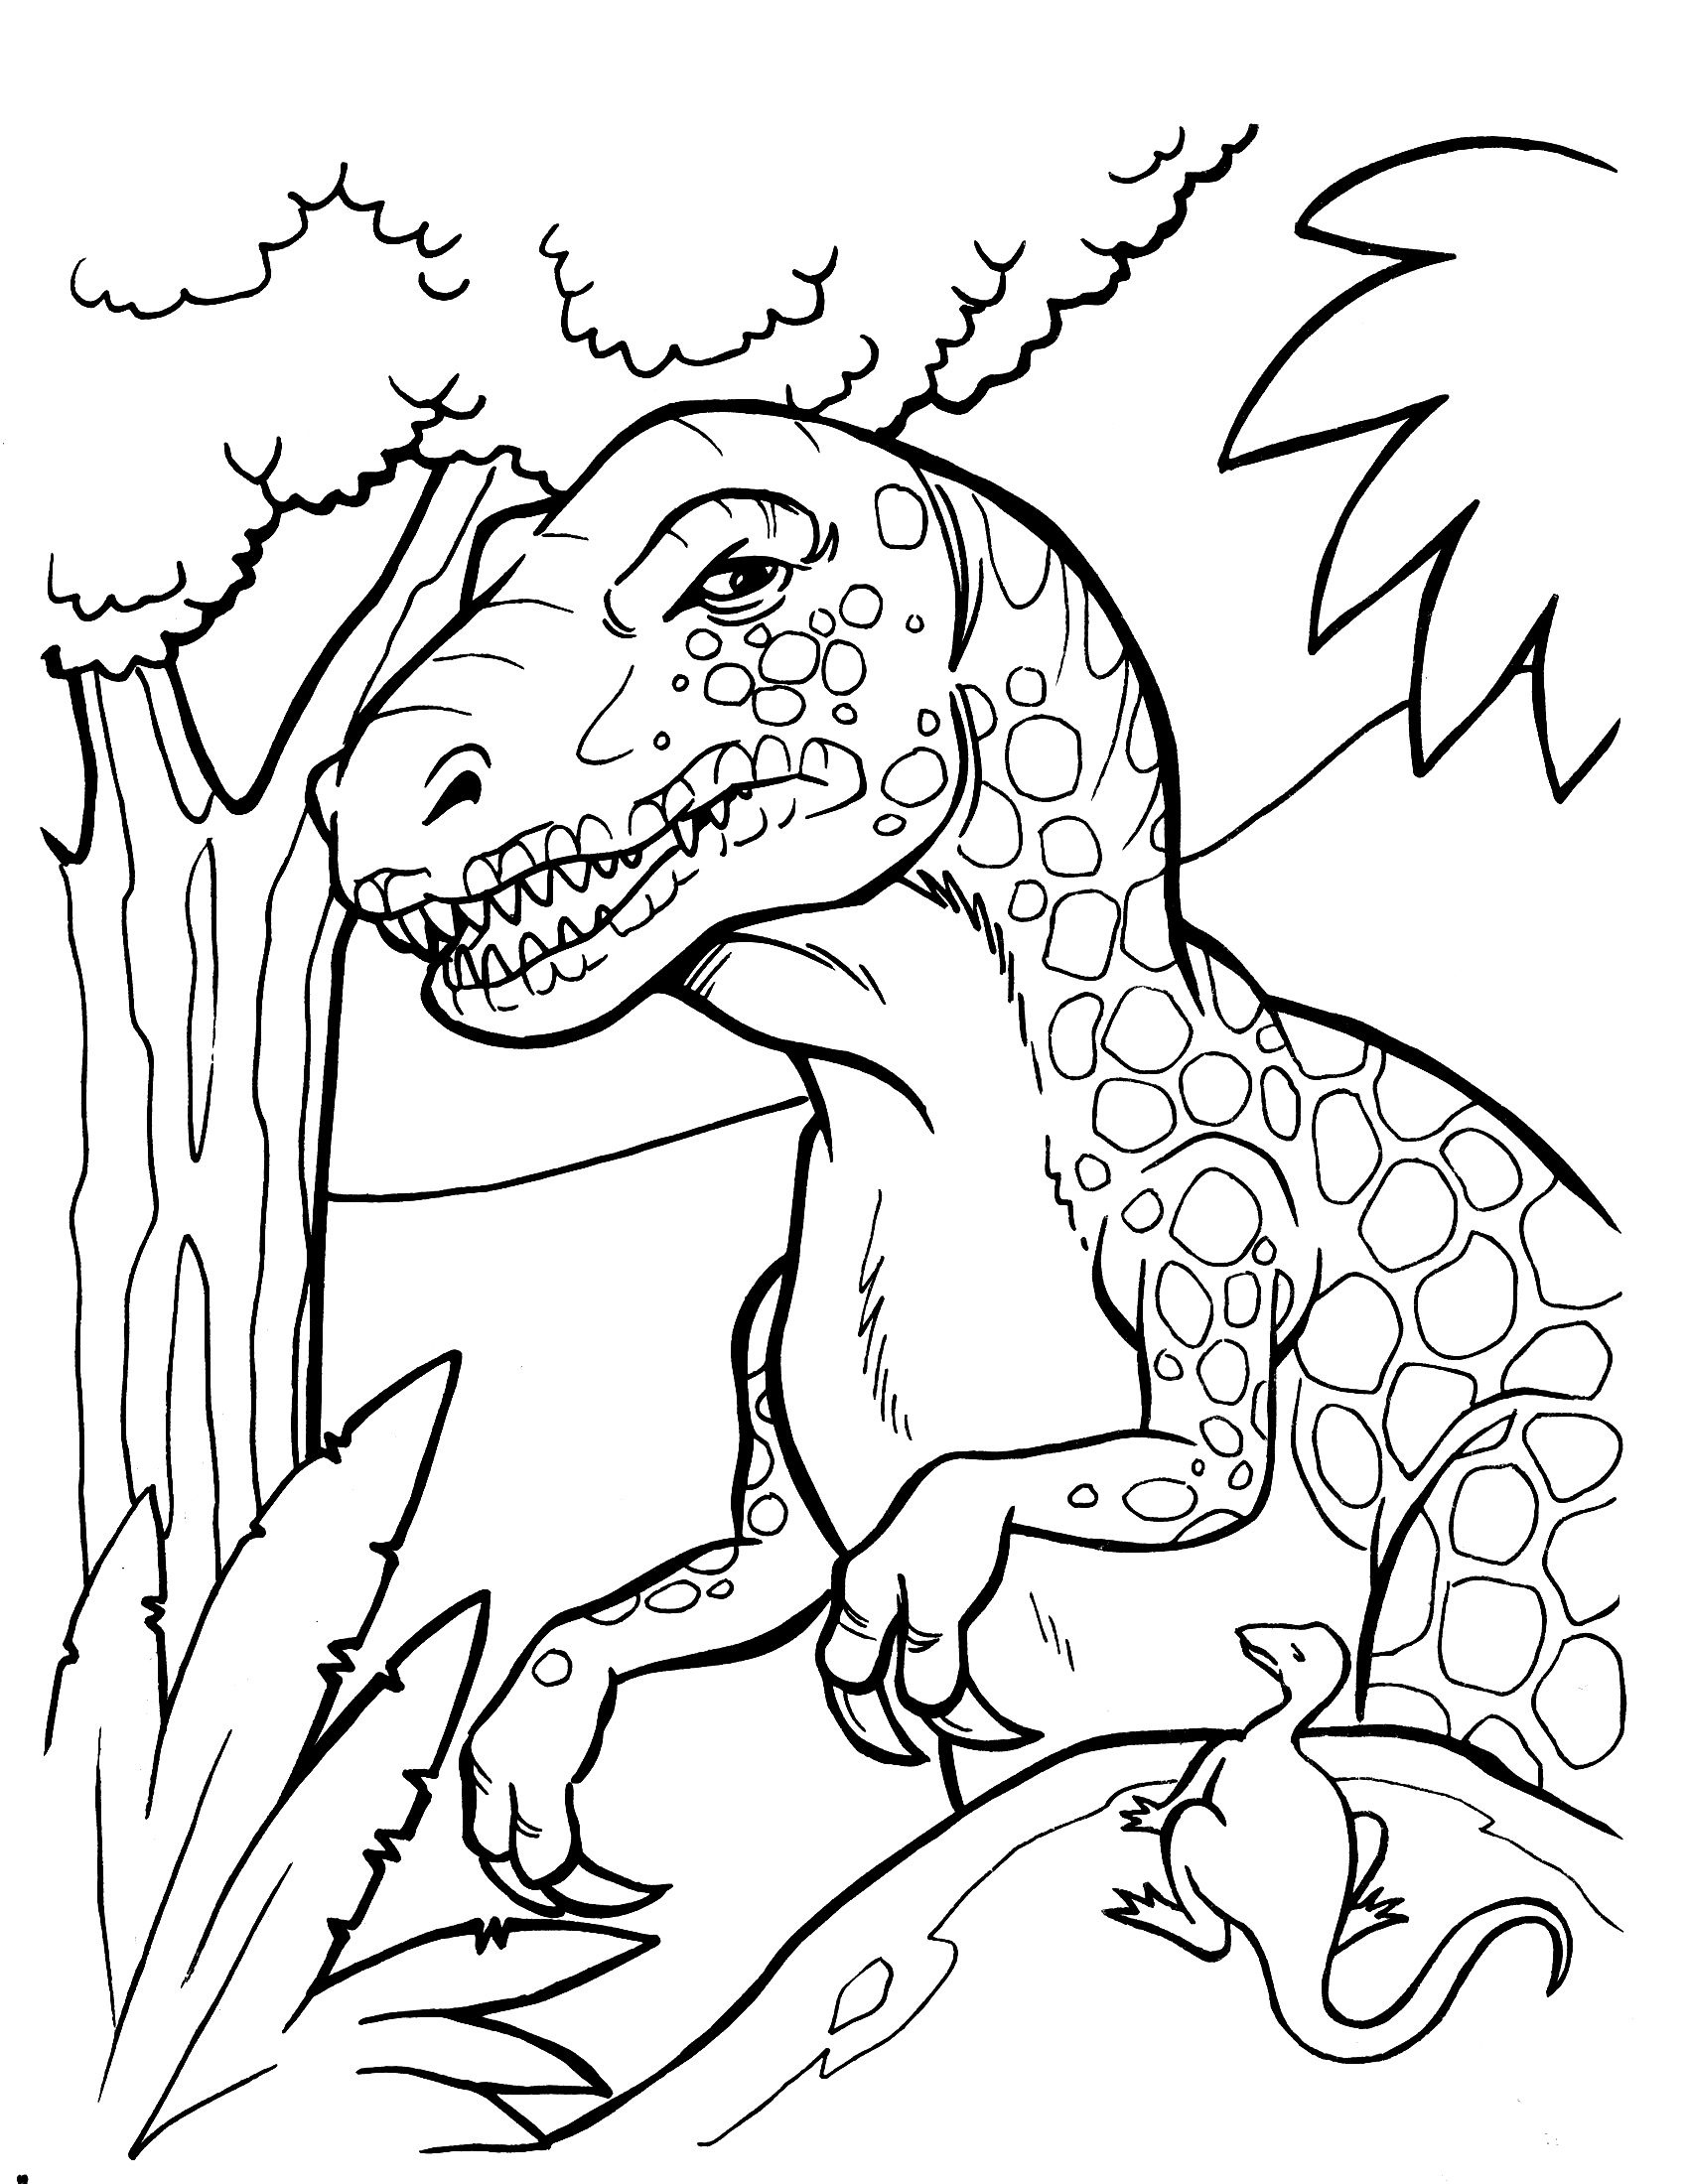 Free Printable Dinosaur Coloring Pages | Clip And Color Part Two - Free Printable Dinosaur Coloring Pages